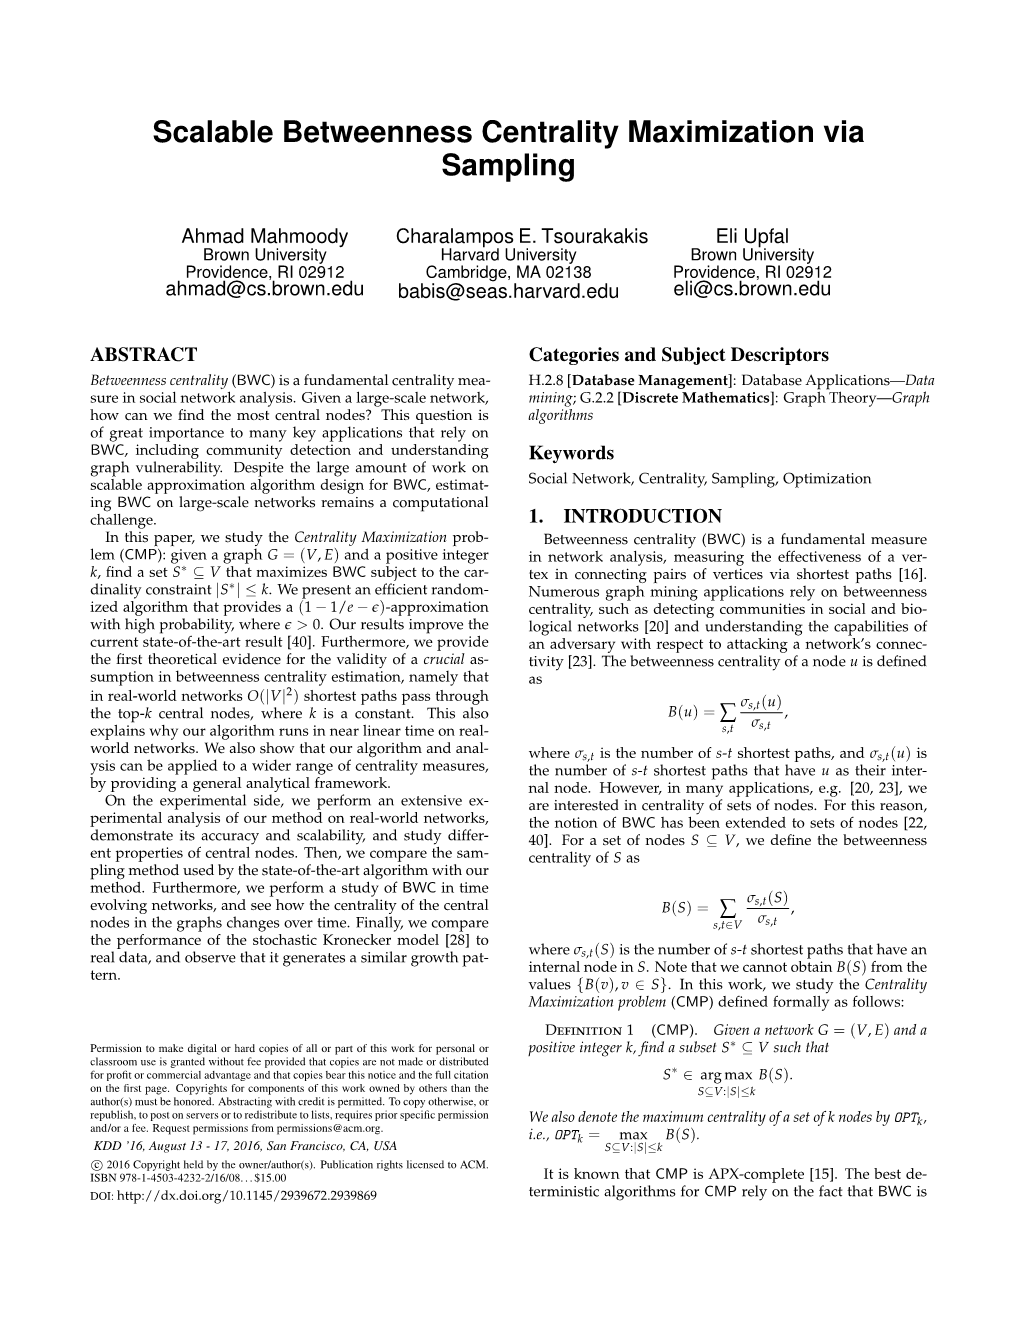 Scalable Betweenness Centrality Maximization Via Sampling